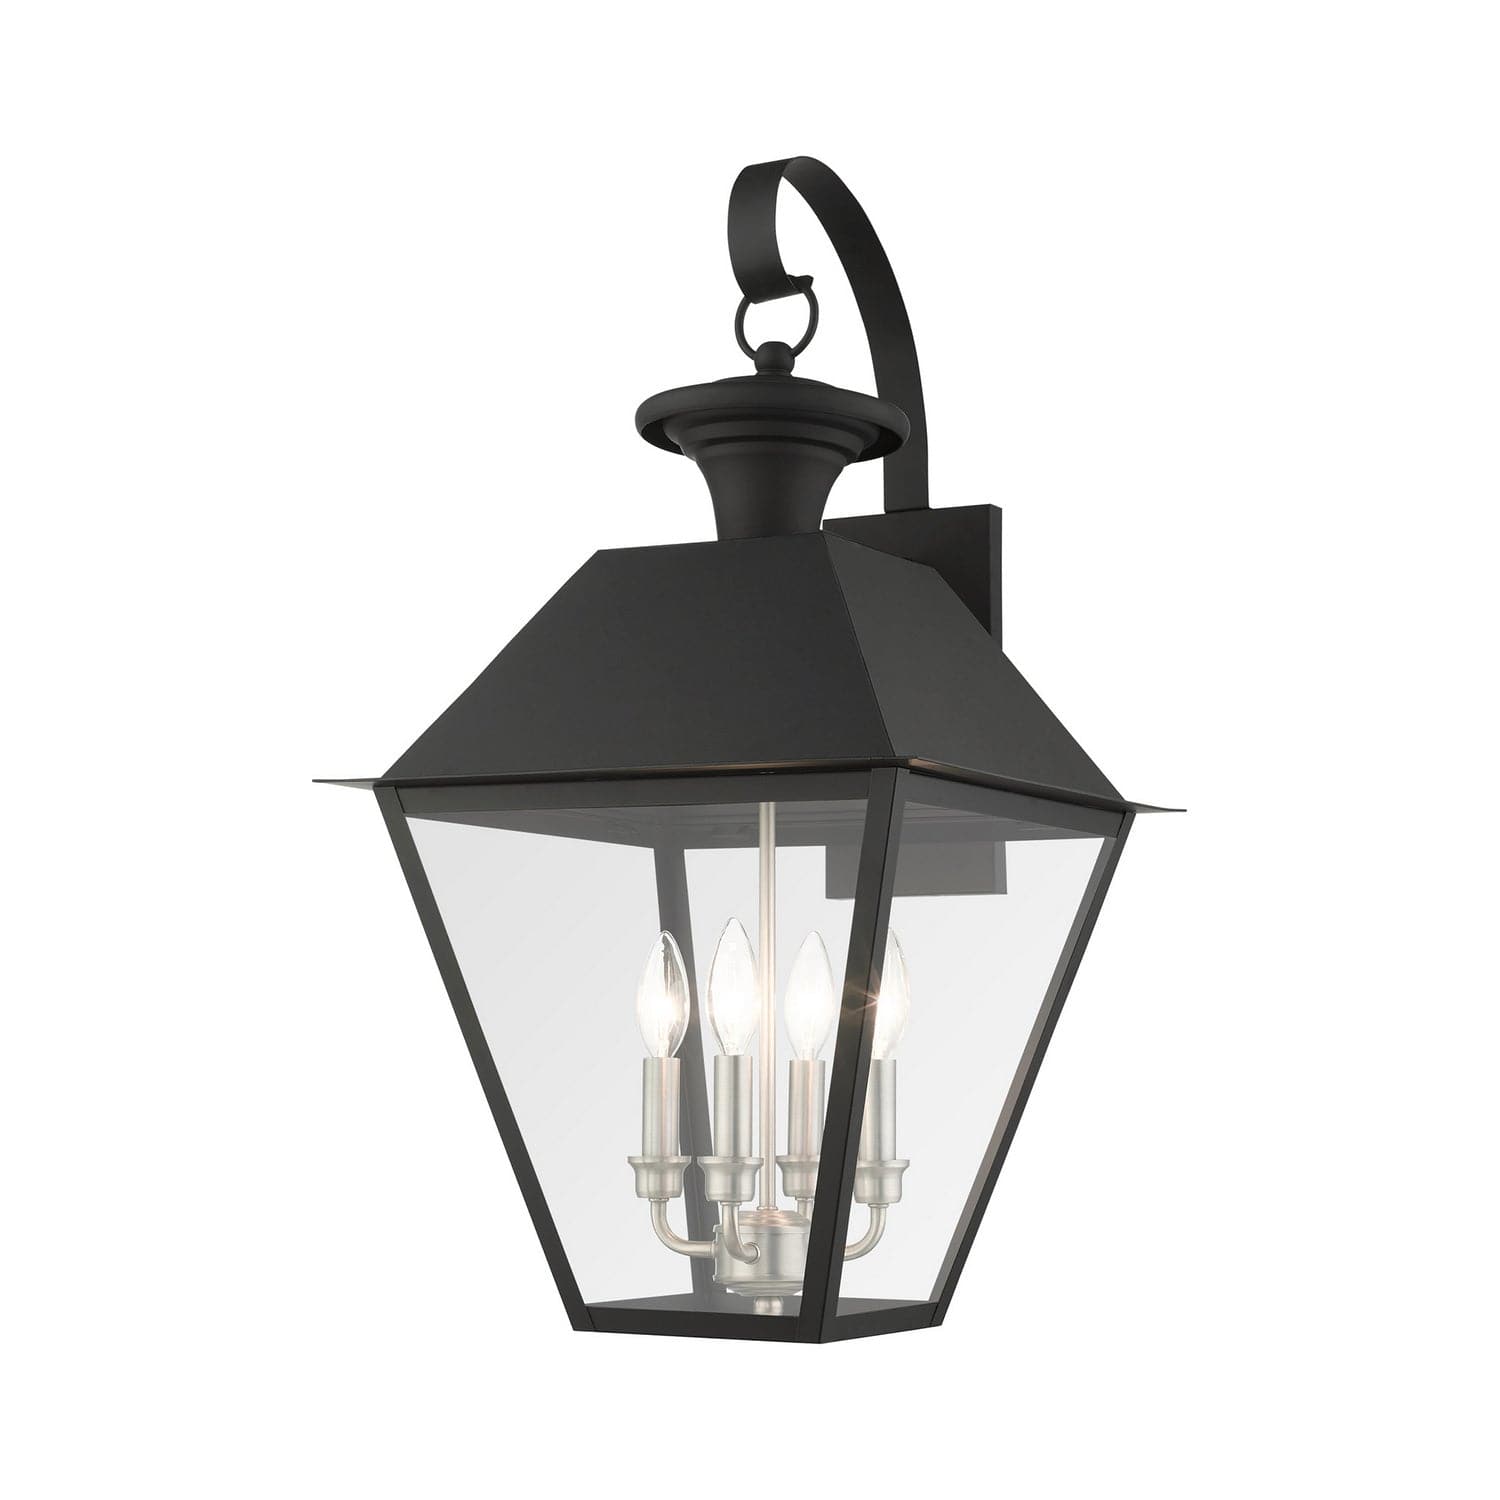 Livex Lighting - 27222-04 - Four Light Outdoor Wall Lantern - Wentworth - Black w/ Brushed Nickel Cluster